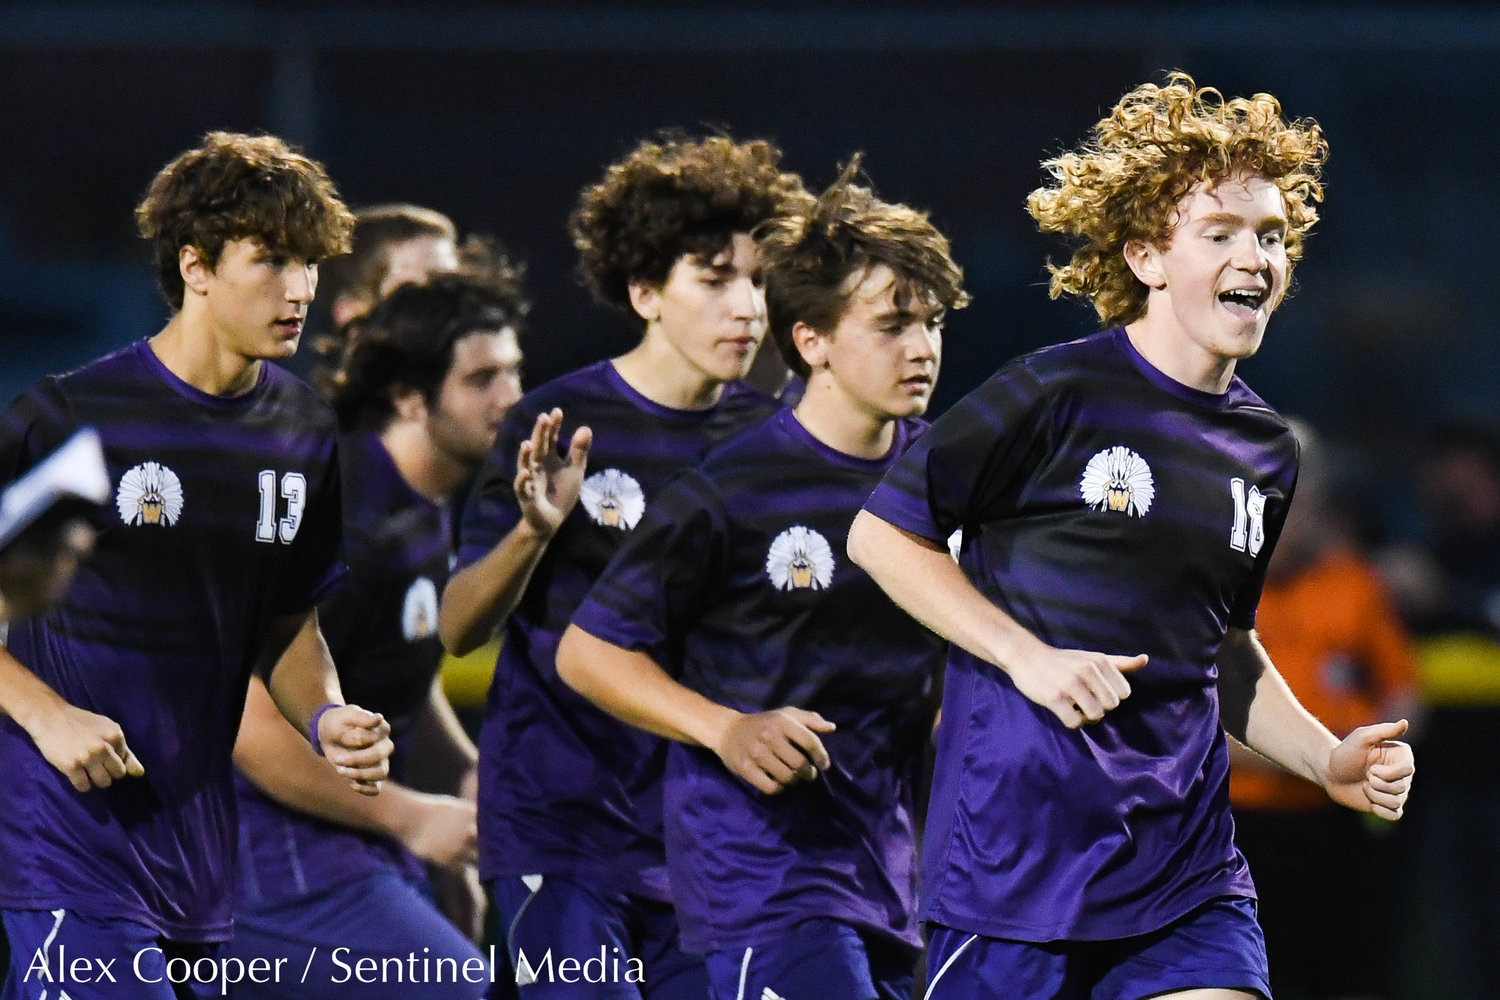 Waterville players celebrate after scoring a goal during the Class C boys soccer semifinals game against Mt. Markham on Wednesday, Oct. 26 at Canastota. Waterville won 2-1.